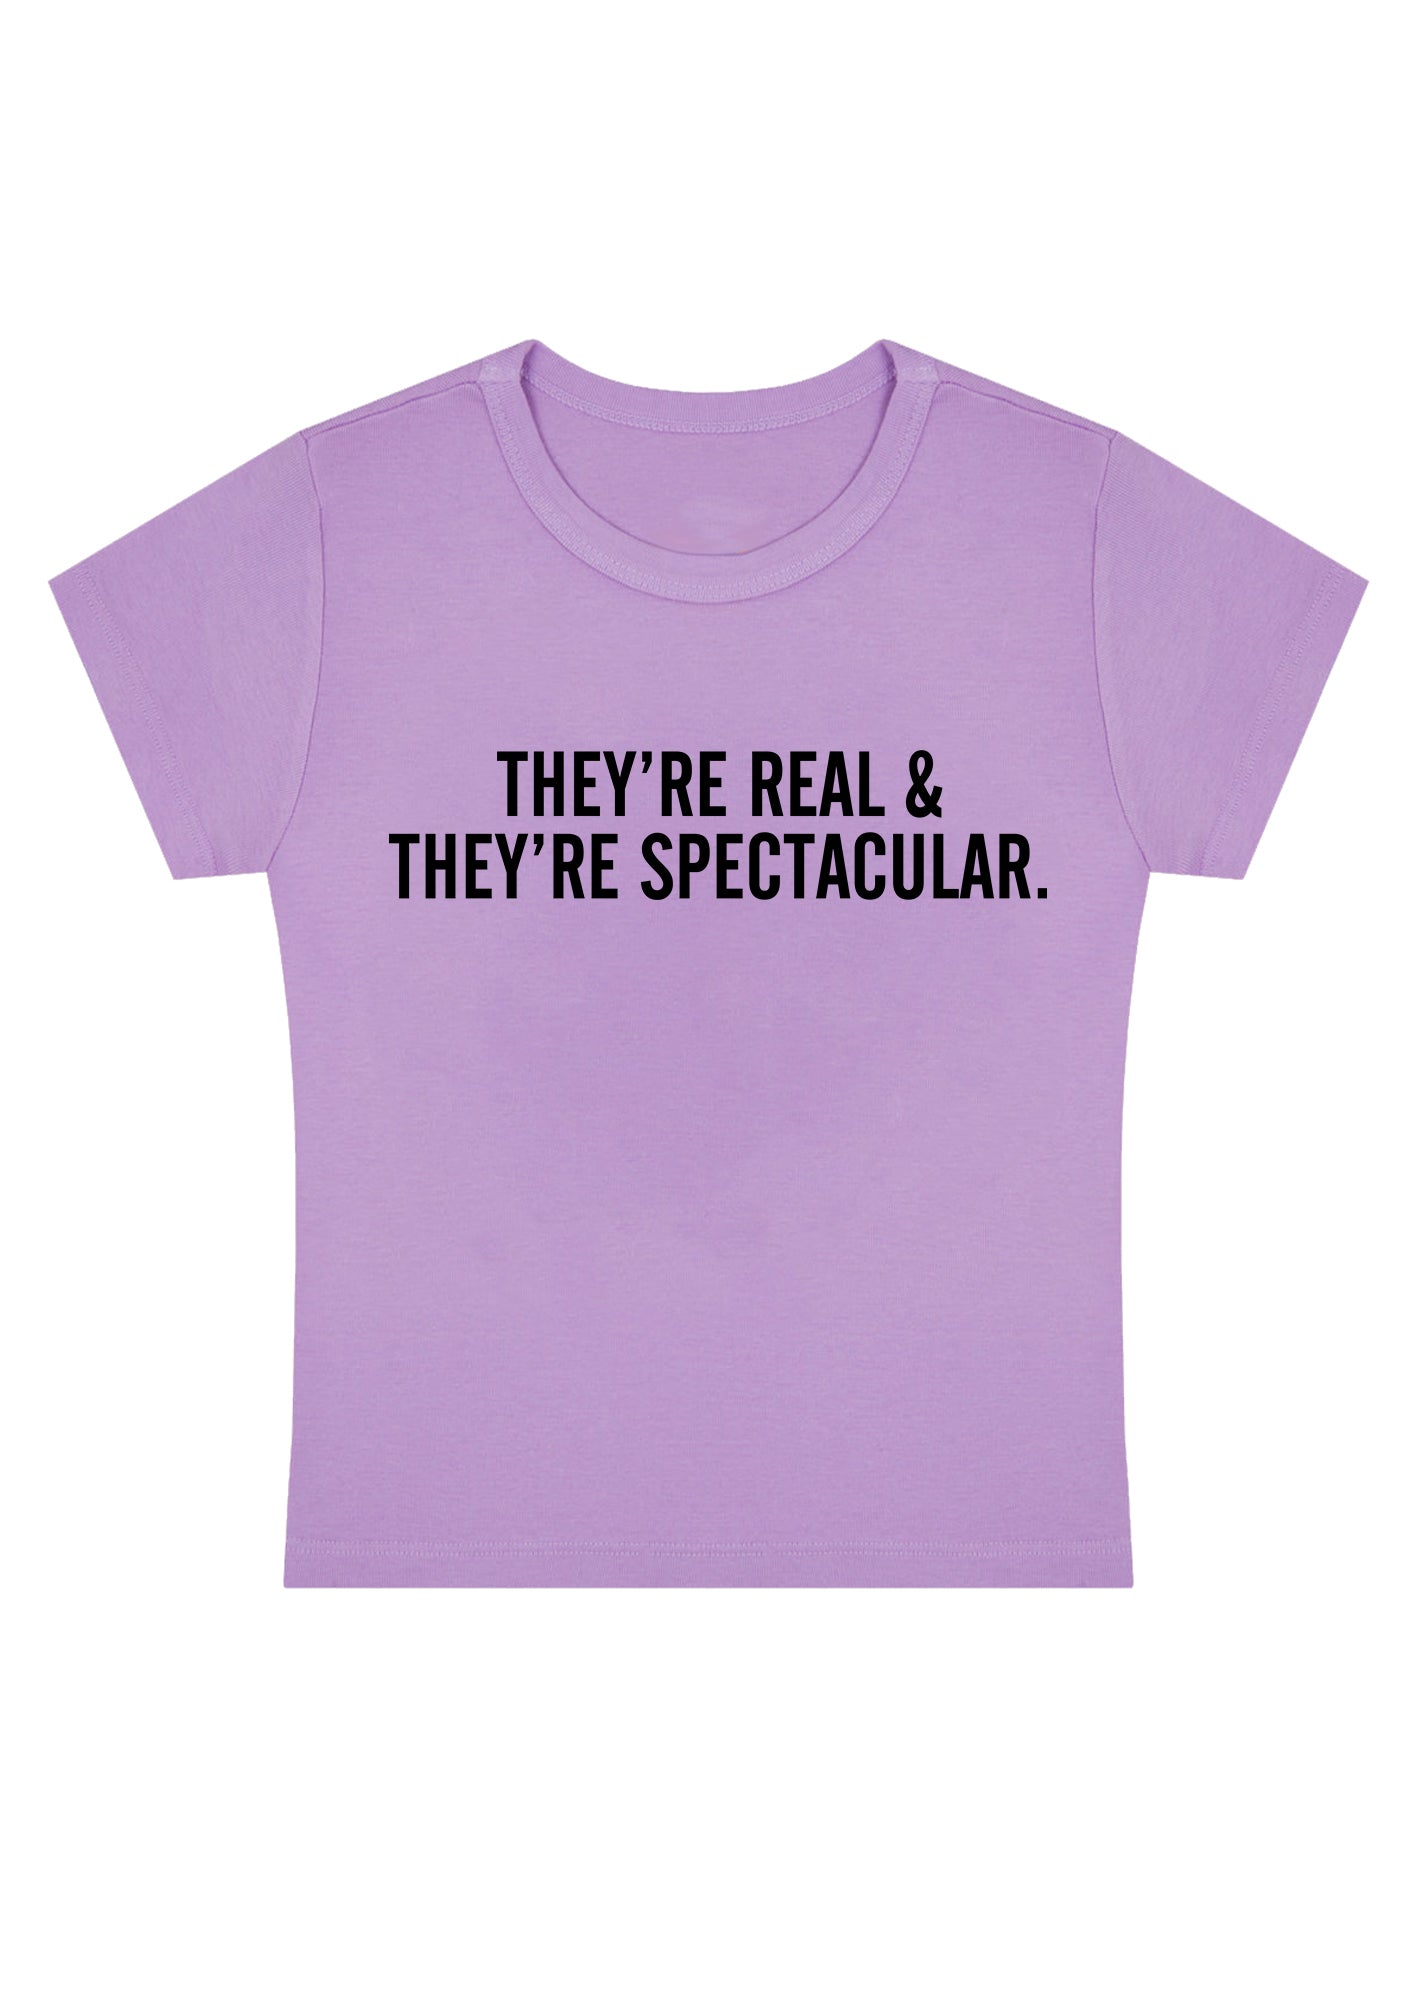 They Are Real&Spectacular Y2K Baby Tee